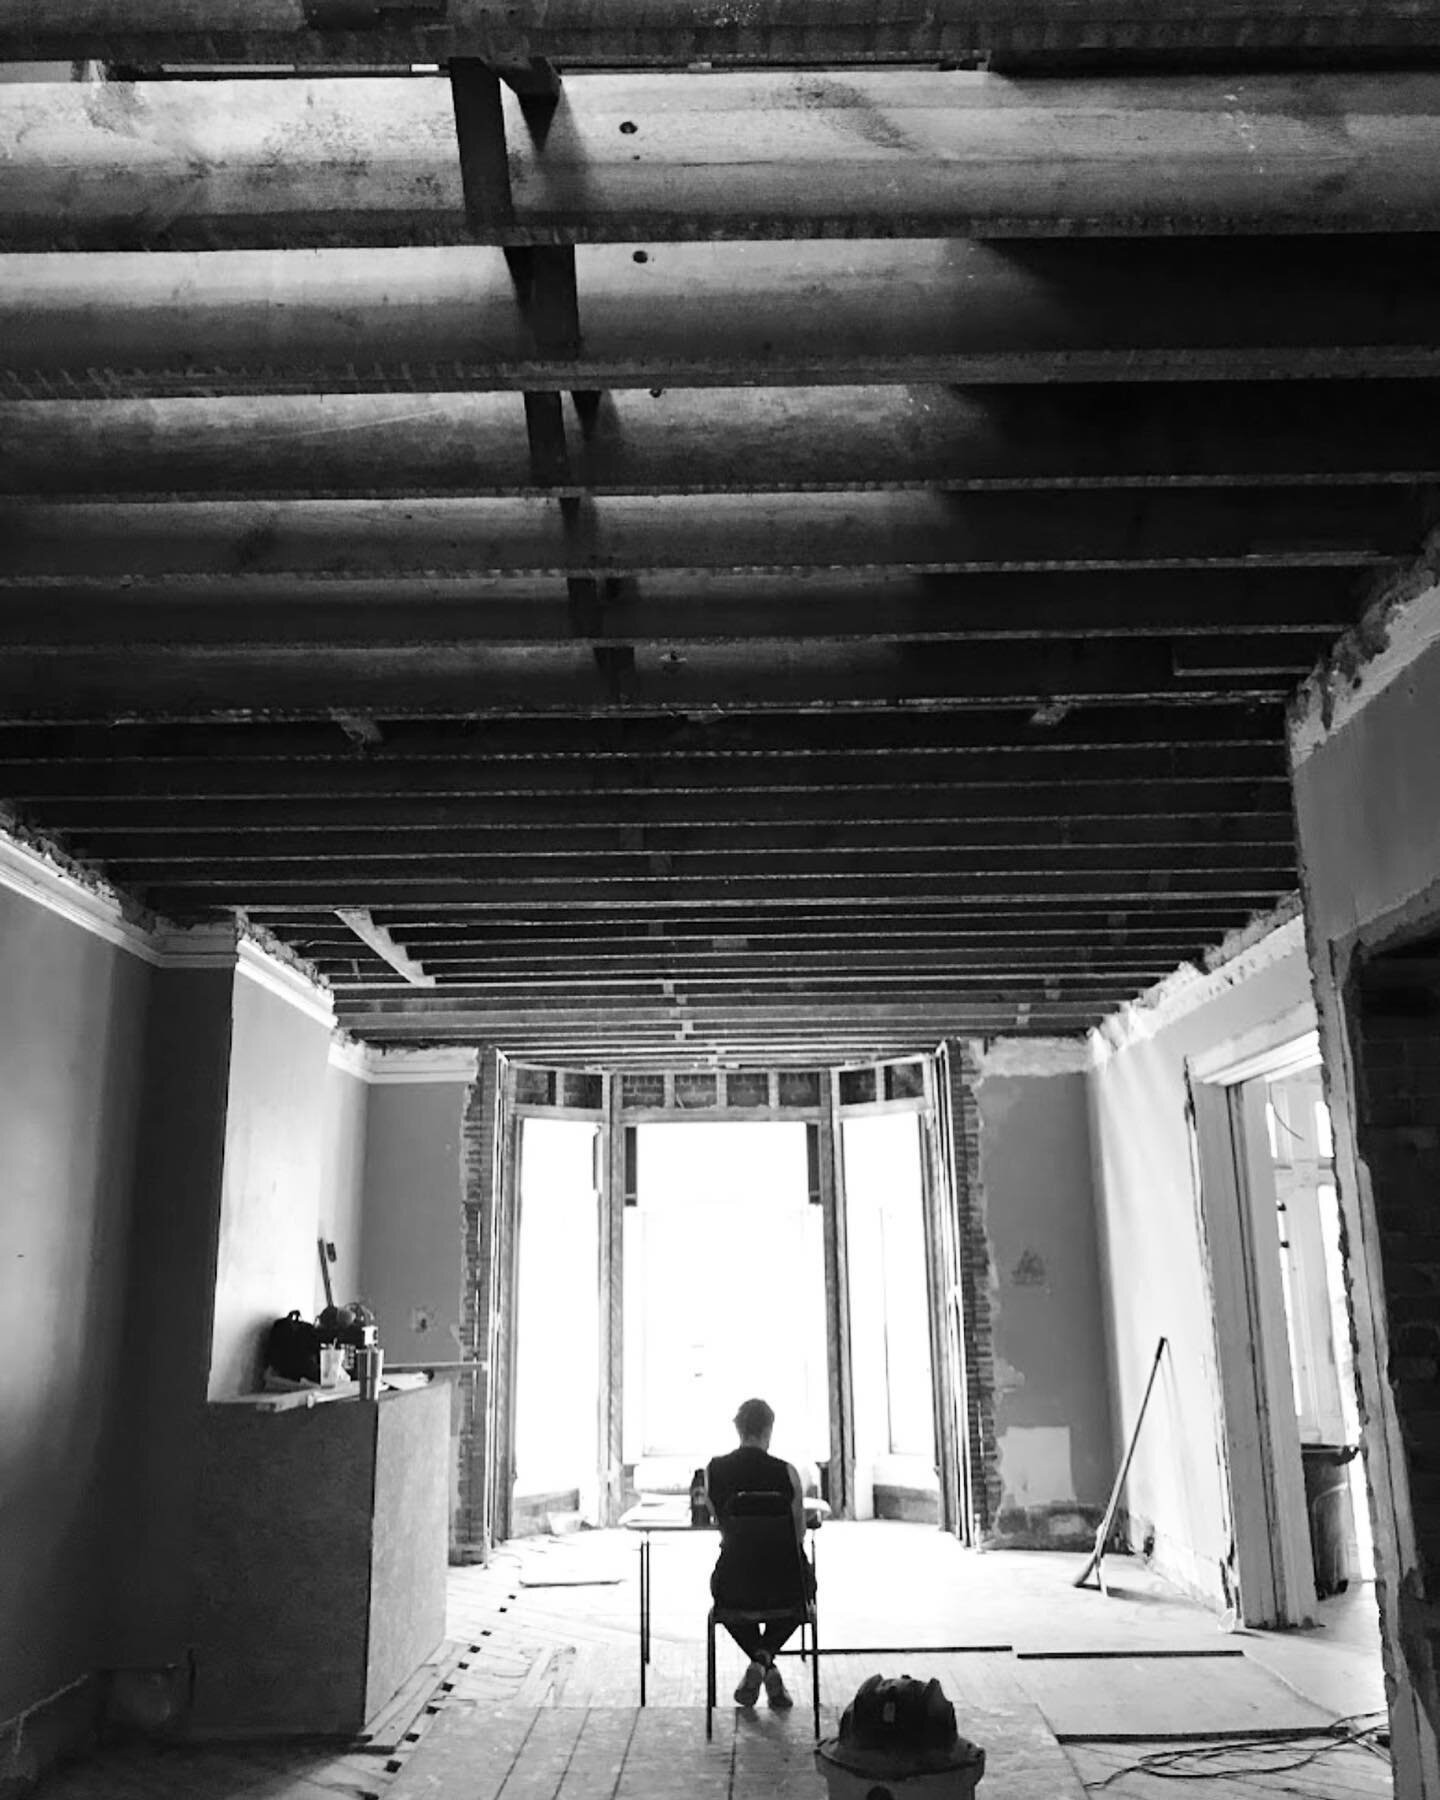 my three favorite times of any project are at the beginning of design when the possibilities are endless, when materials selection starts and demolition when the home begins to breath and the new space emerges 

#architecture #dcarchitecture #twincit